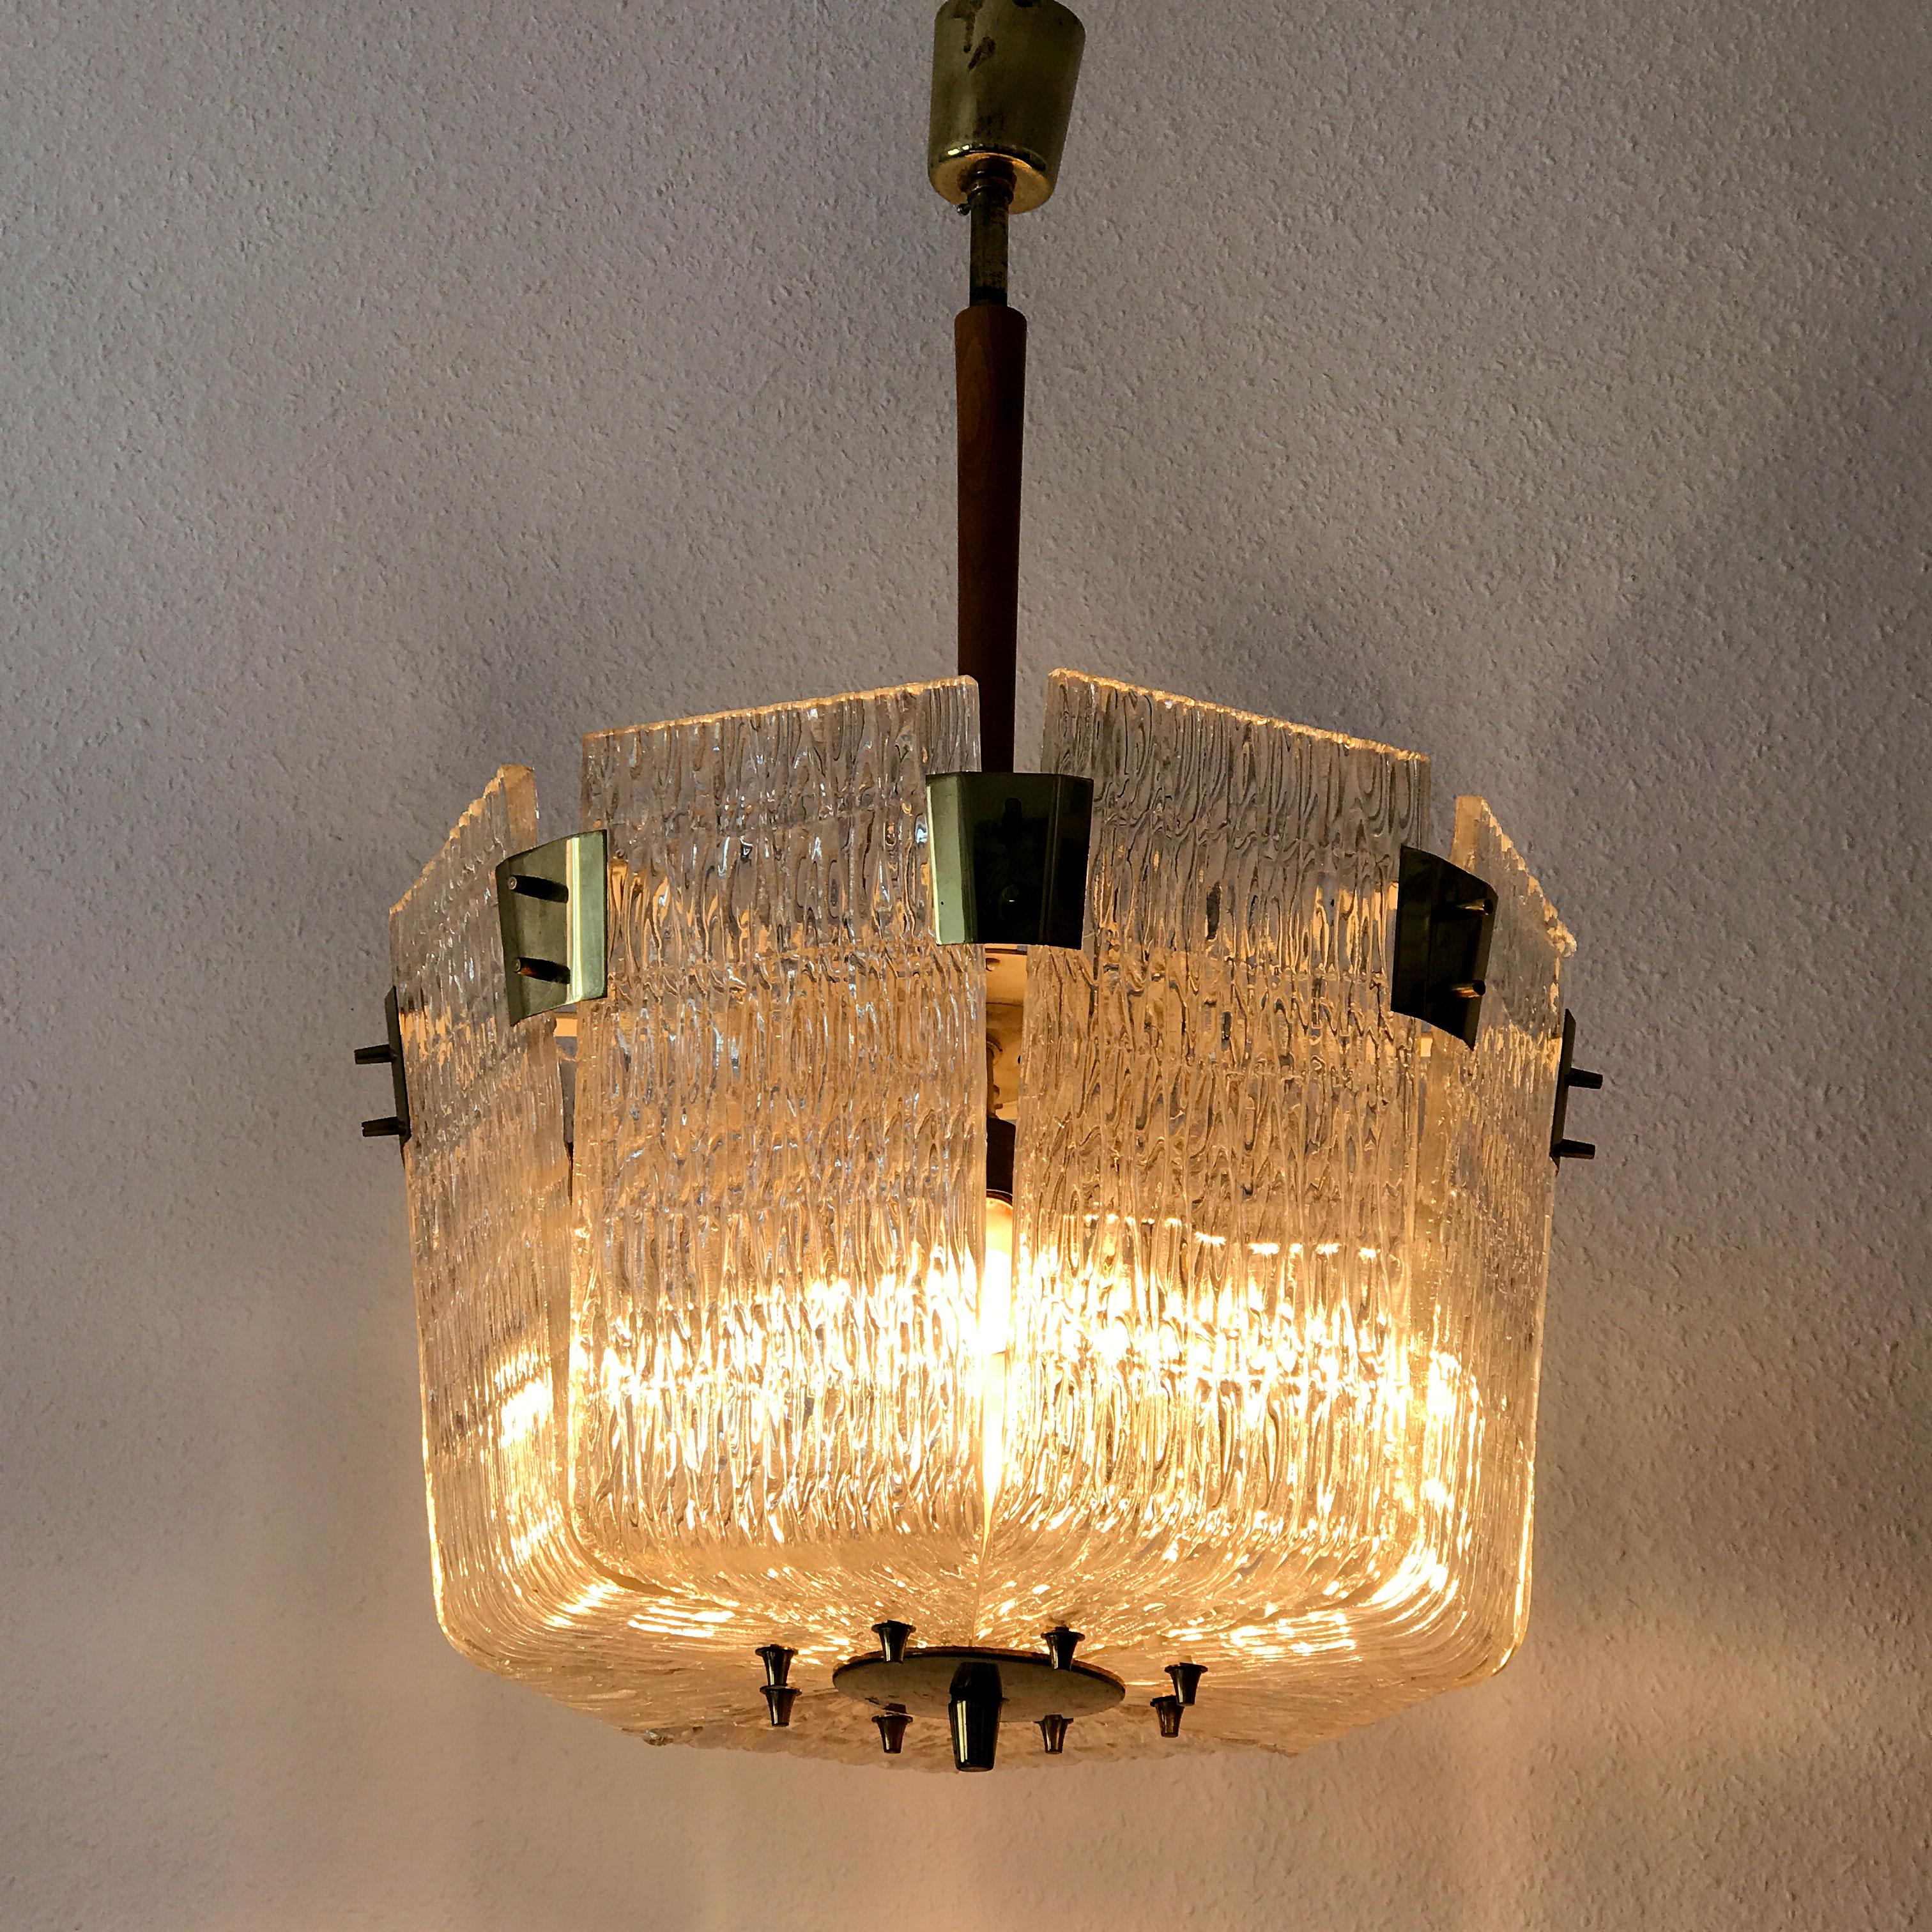 Gorgeous Mid-Century Modern 4-flamed basket chandelier or pendant lamp. Designed and manufactured by J.T. Kalmar, Vienna, Austria, 1950s.

Executed with thick frosted glass elements and brass body. The chandelier needs 4 x E127 Edison screw fit